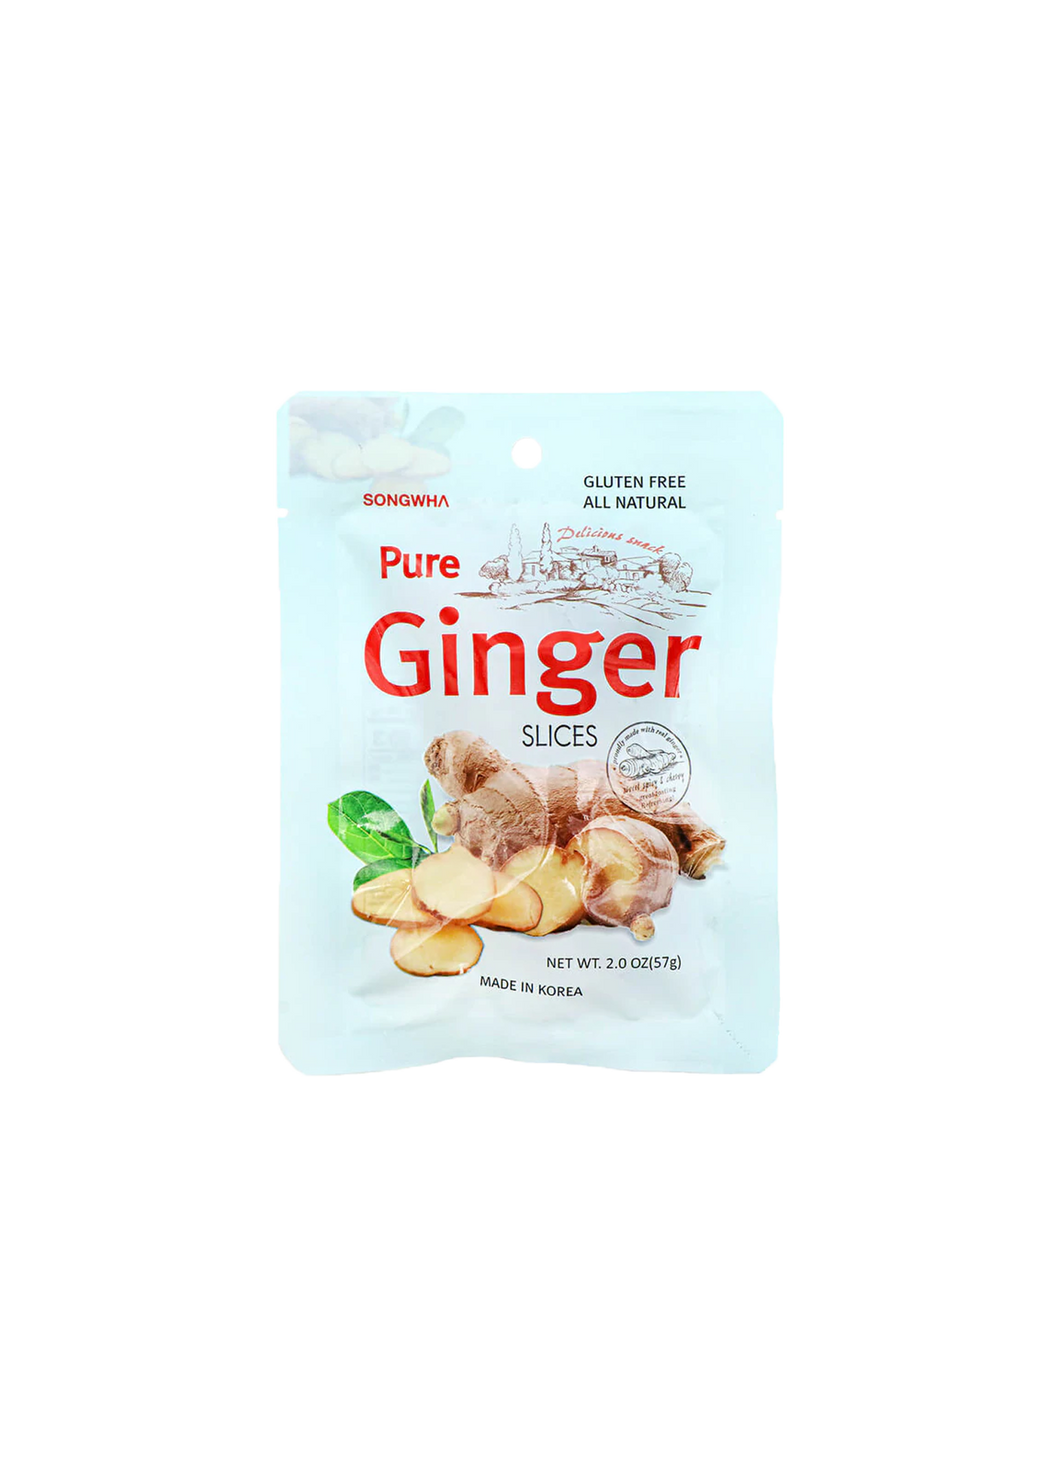 Songwha Pure Ginger Slices 57g